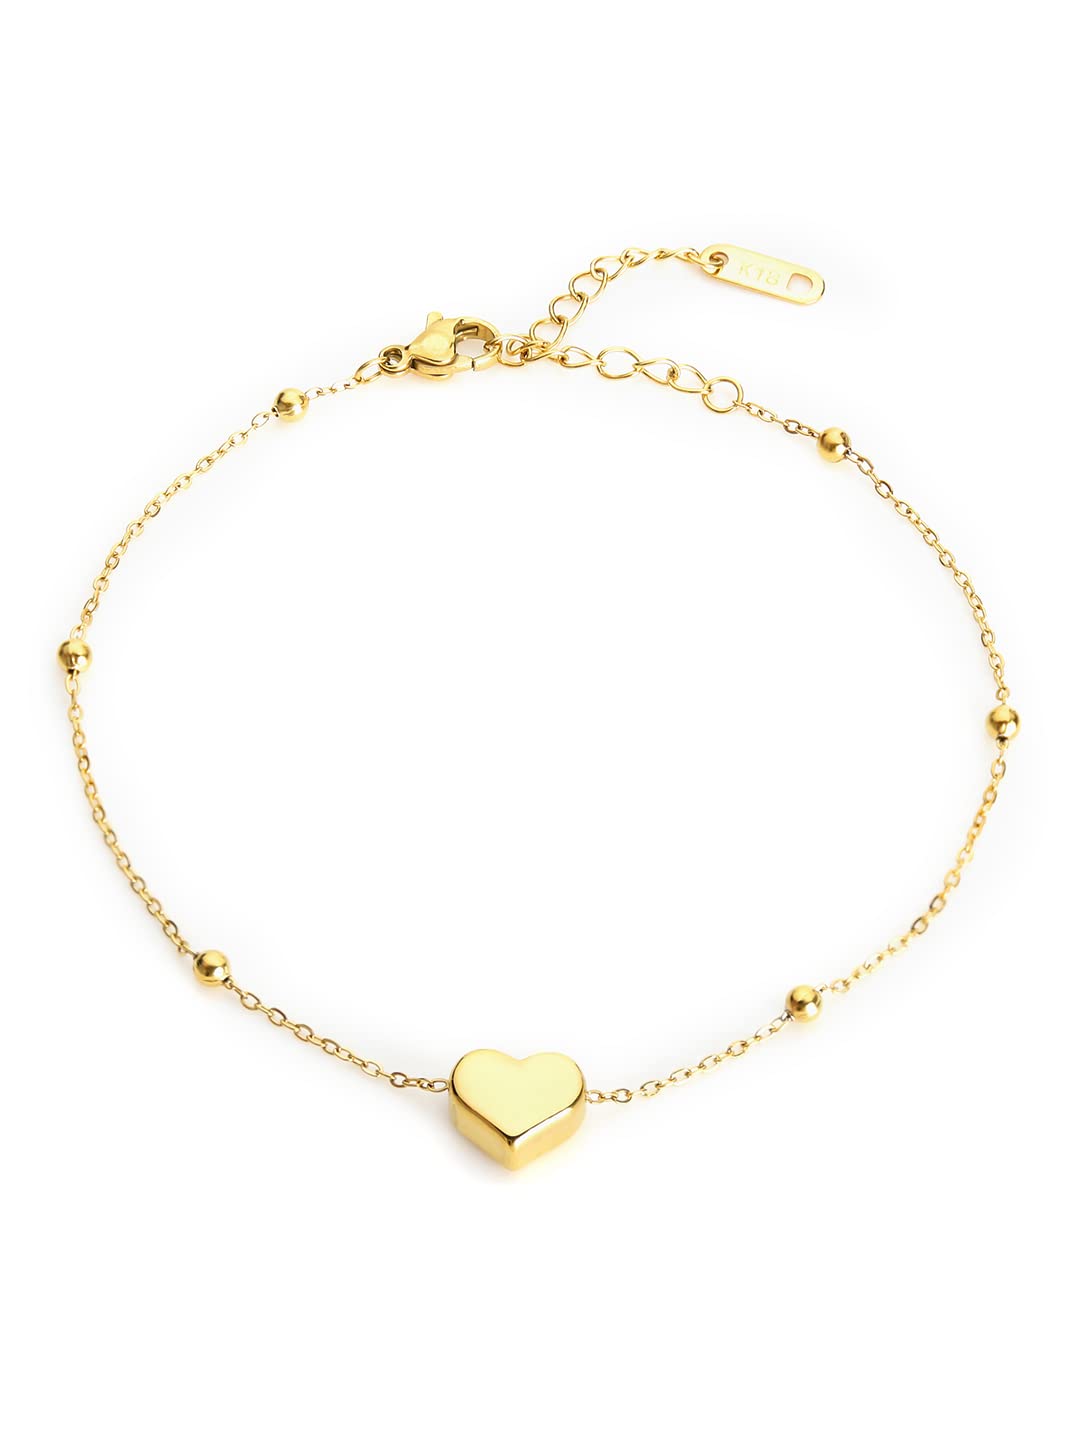 Yellow Chimes Anklets for Women Gold-Plated Heart-Shaped Fashion Anklet Payal for Women and Girls